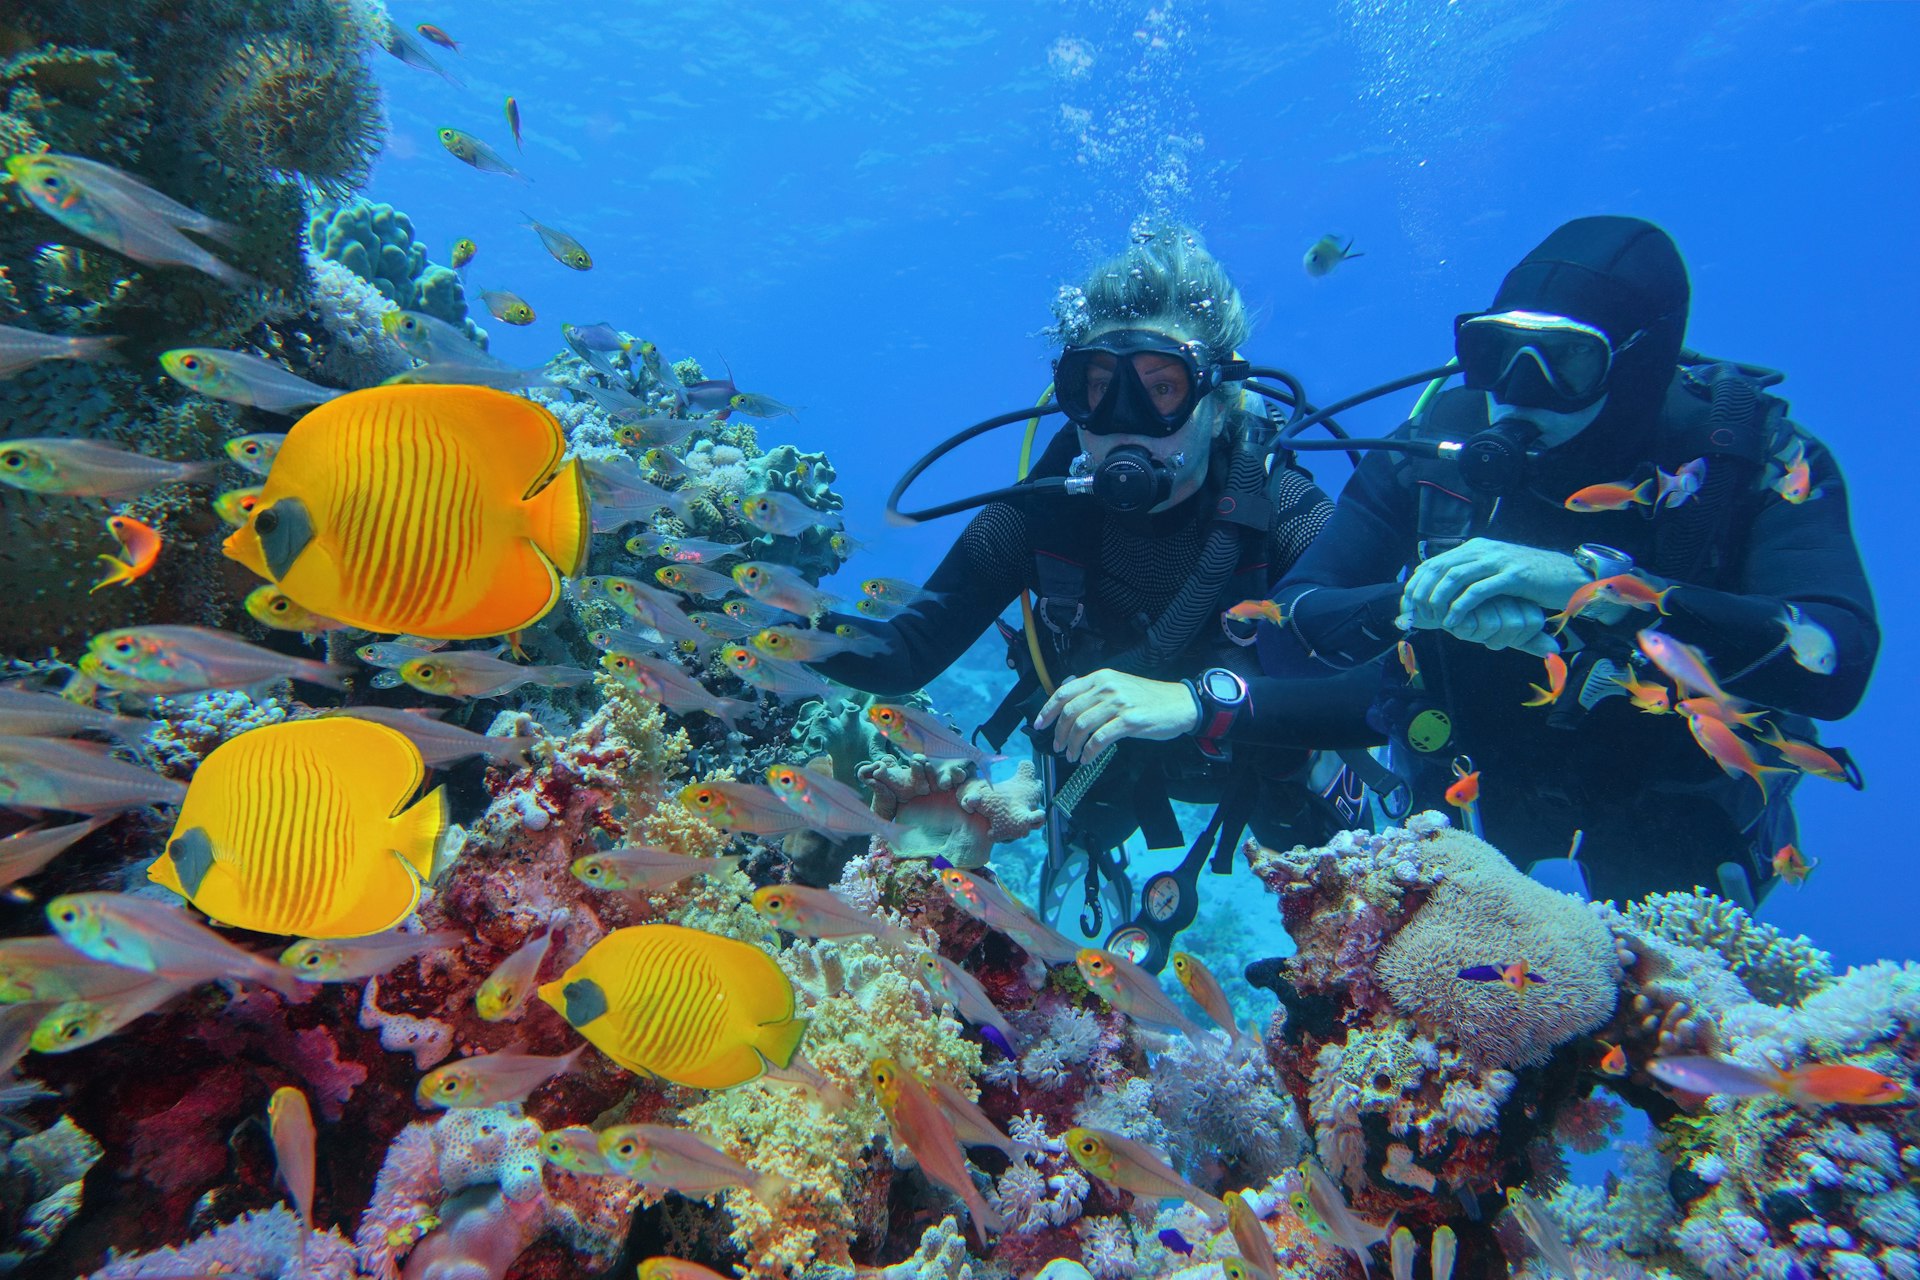 Scuba divers on a reef at Marsa Alam with yellow butterfly fish